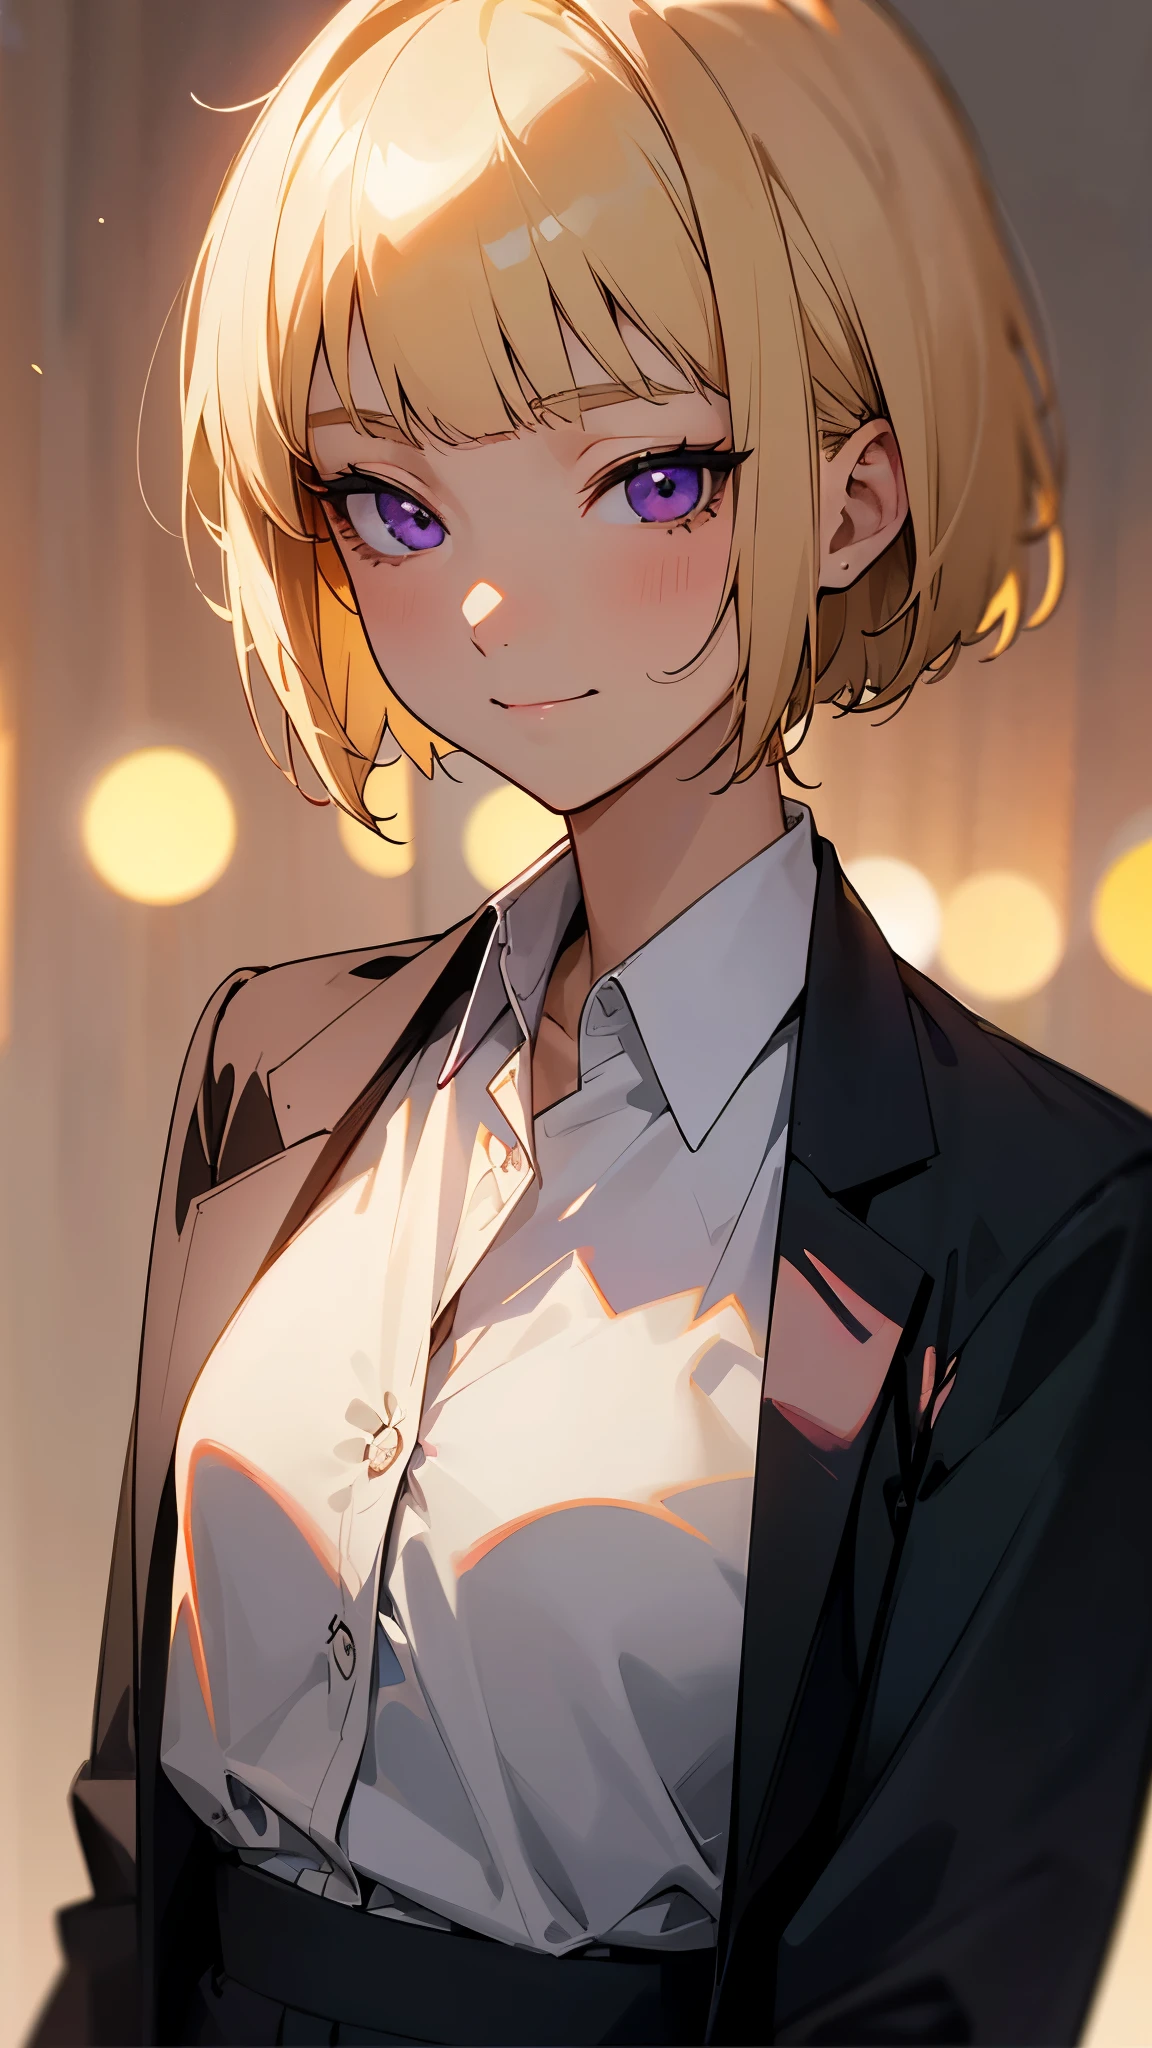 1 girl、8k、Sharp focus、(Bokeh) (highest quality) (Detailed skin:1.3) (Intricate details) (anime)、(blonde)、short hair、Bobcut、Blunt bangs、Beautiful purple eyes、Slender body、Upper body close-up、White shirt、Black work trousers、Black Fitted Blazer、Calm face、Mouth closed、Cheeky Smile、Squint your eyes、Park in the background、sunset、Soft lighting.